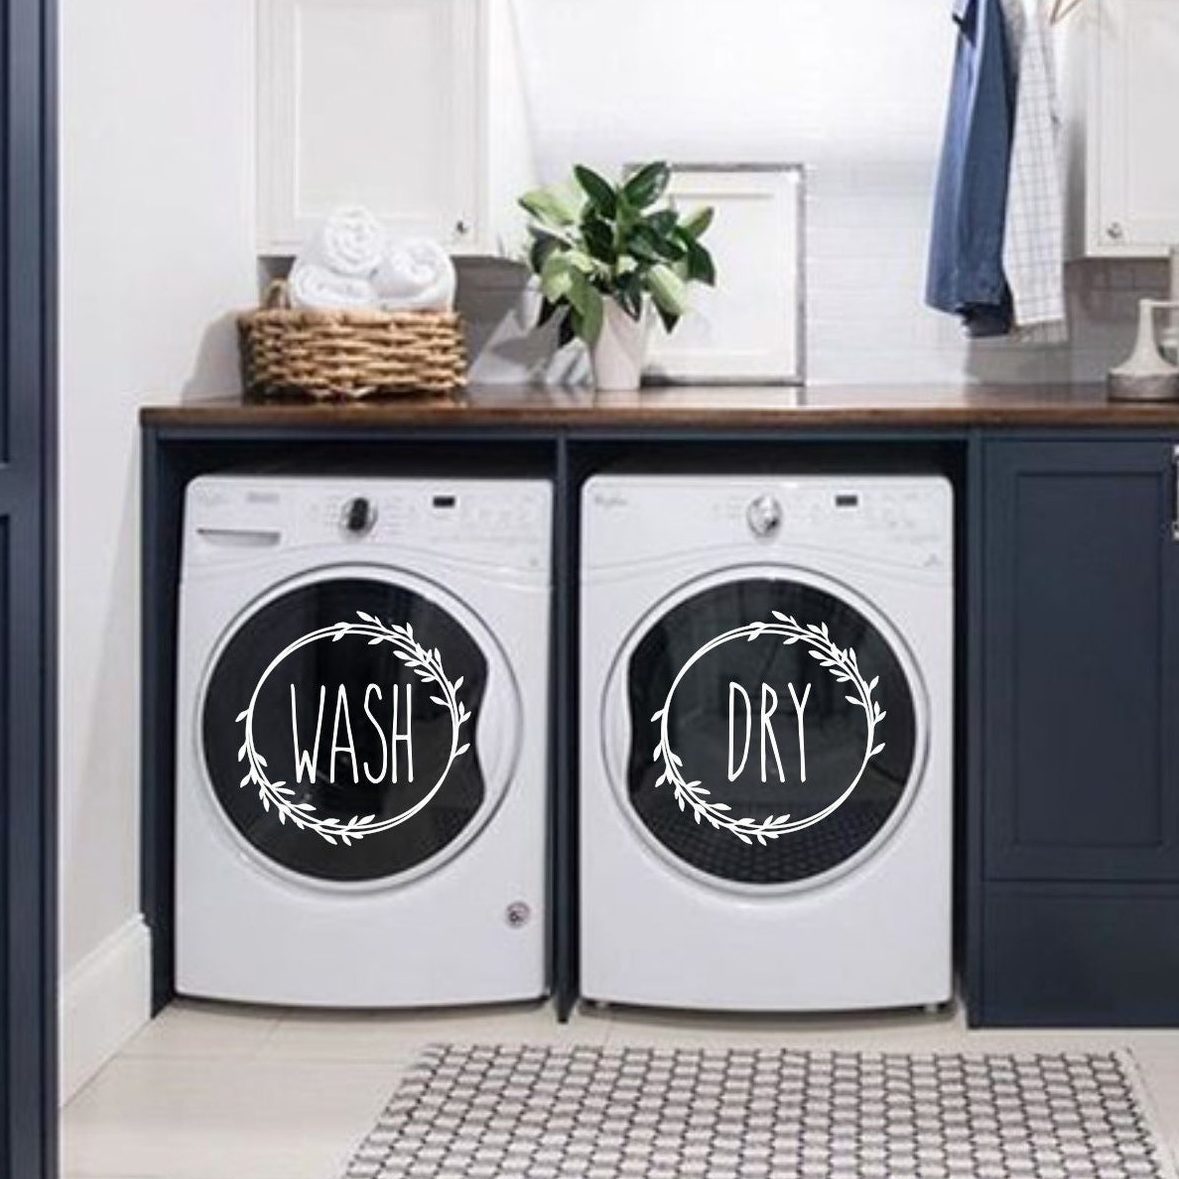 27 Laundry Room Decor Ideas That Balance Function with Style